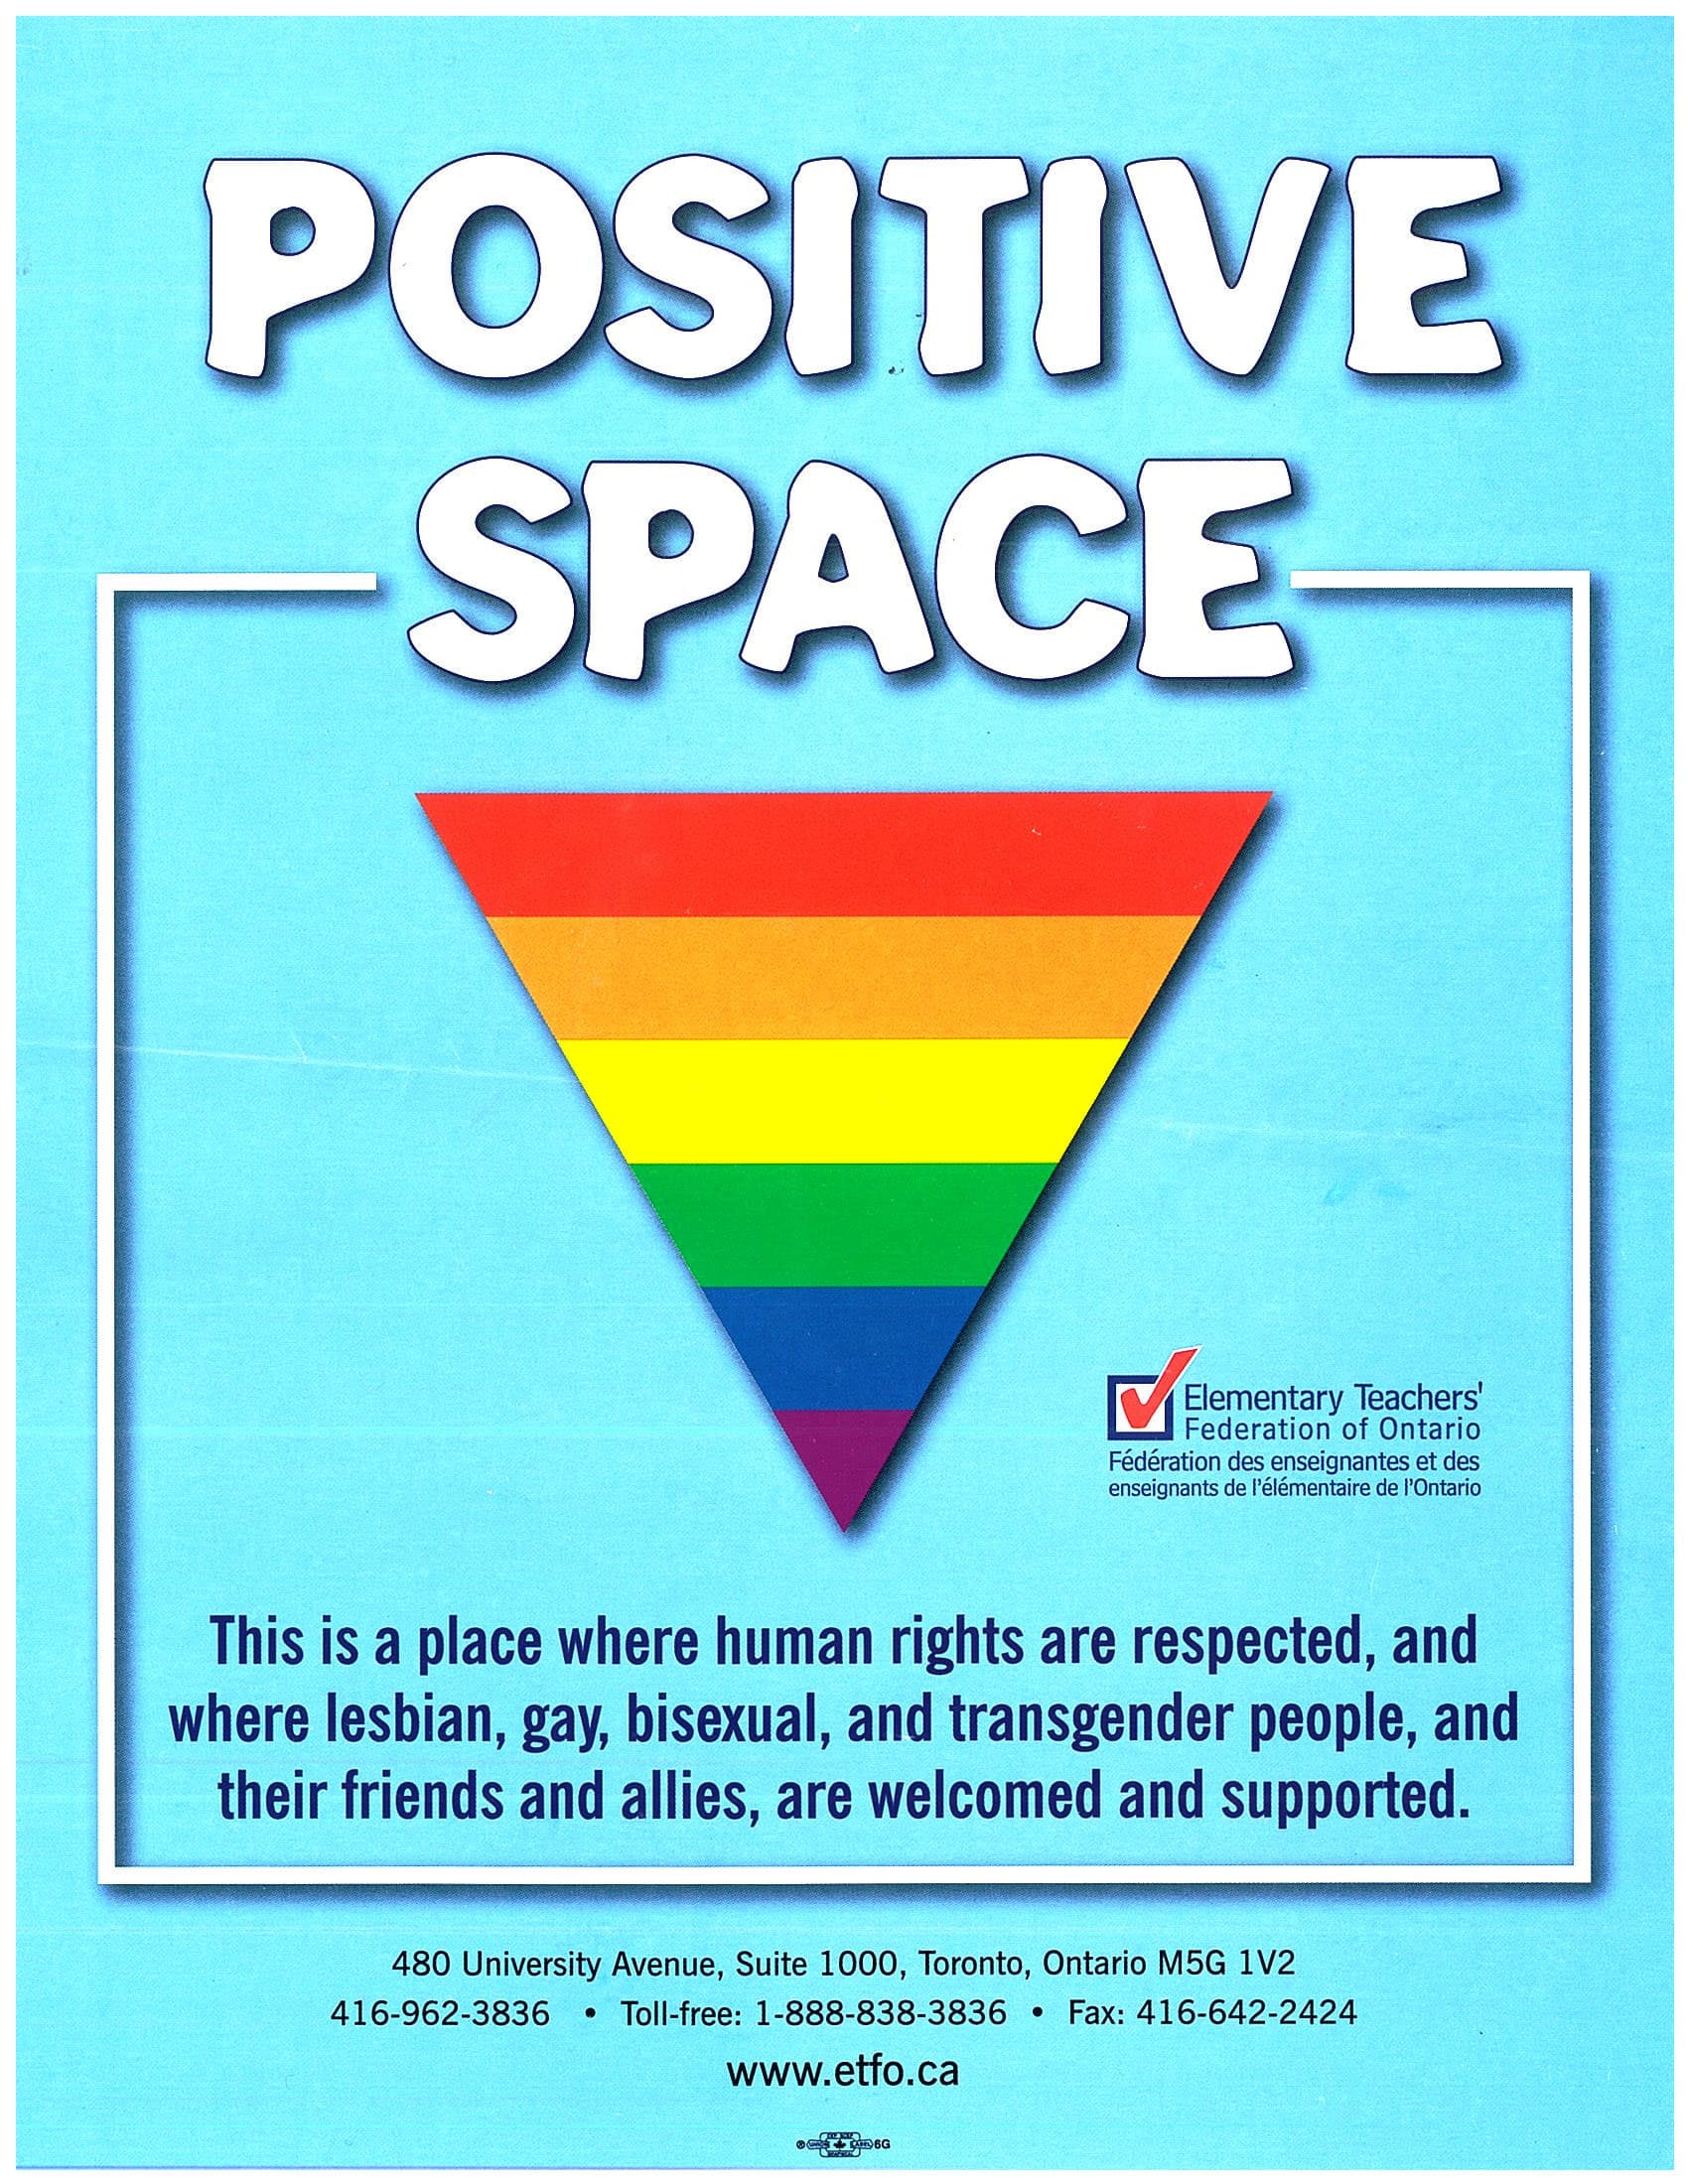 Upside-down rainbow triangle with the words “POSITIVE SPACE” above it, on a blue background